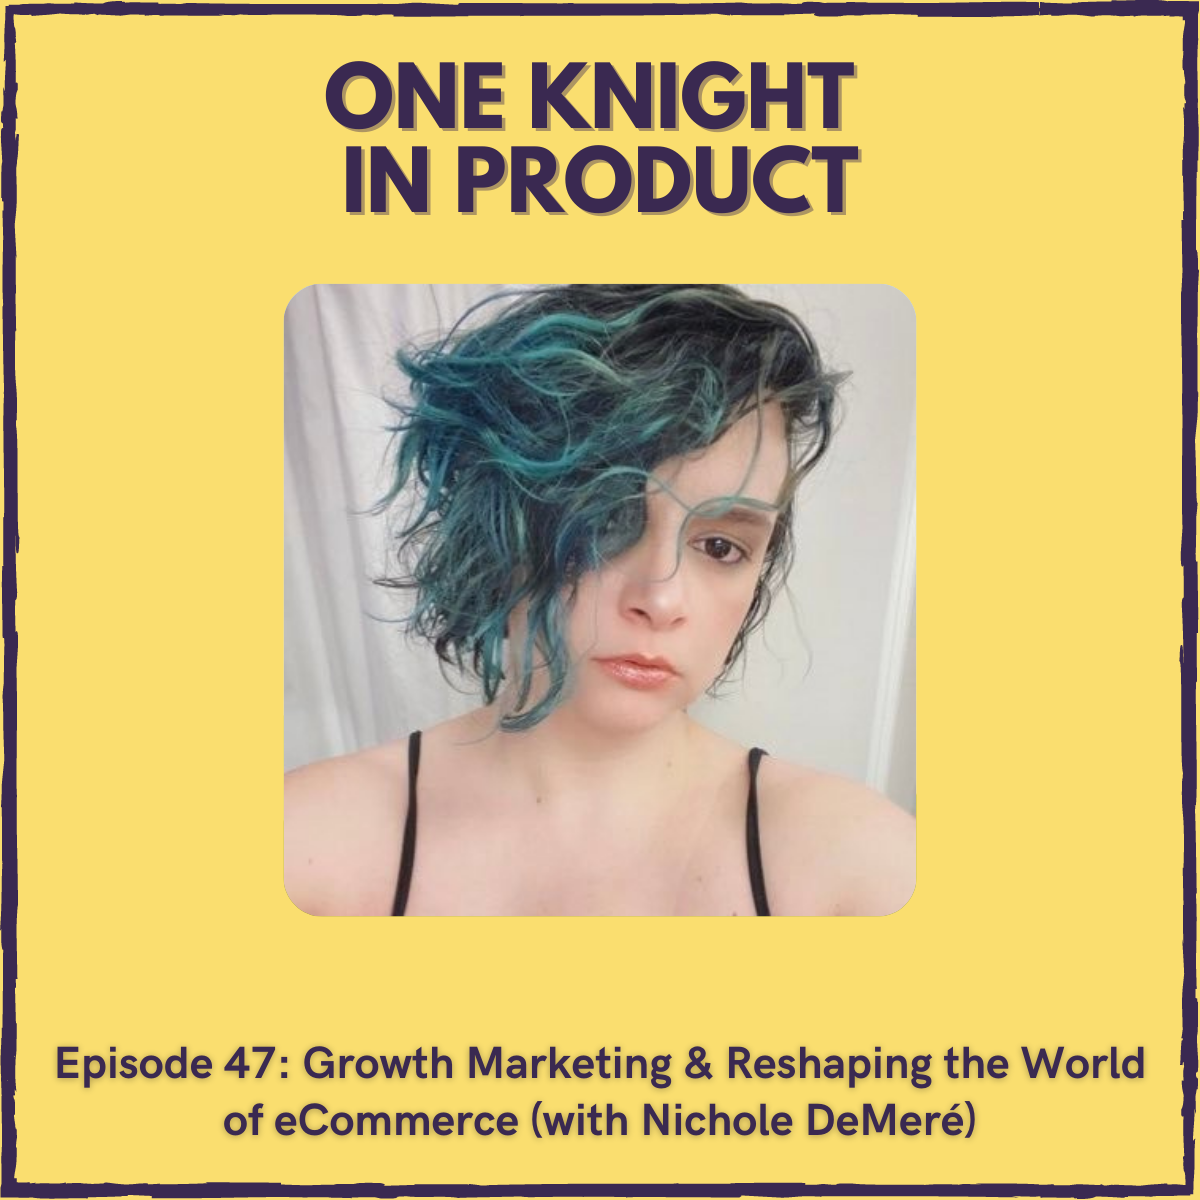 Growth Marketing & Reshaping the World of eCommerce (with Nichole DeMeré, CMO @ Reeview)